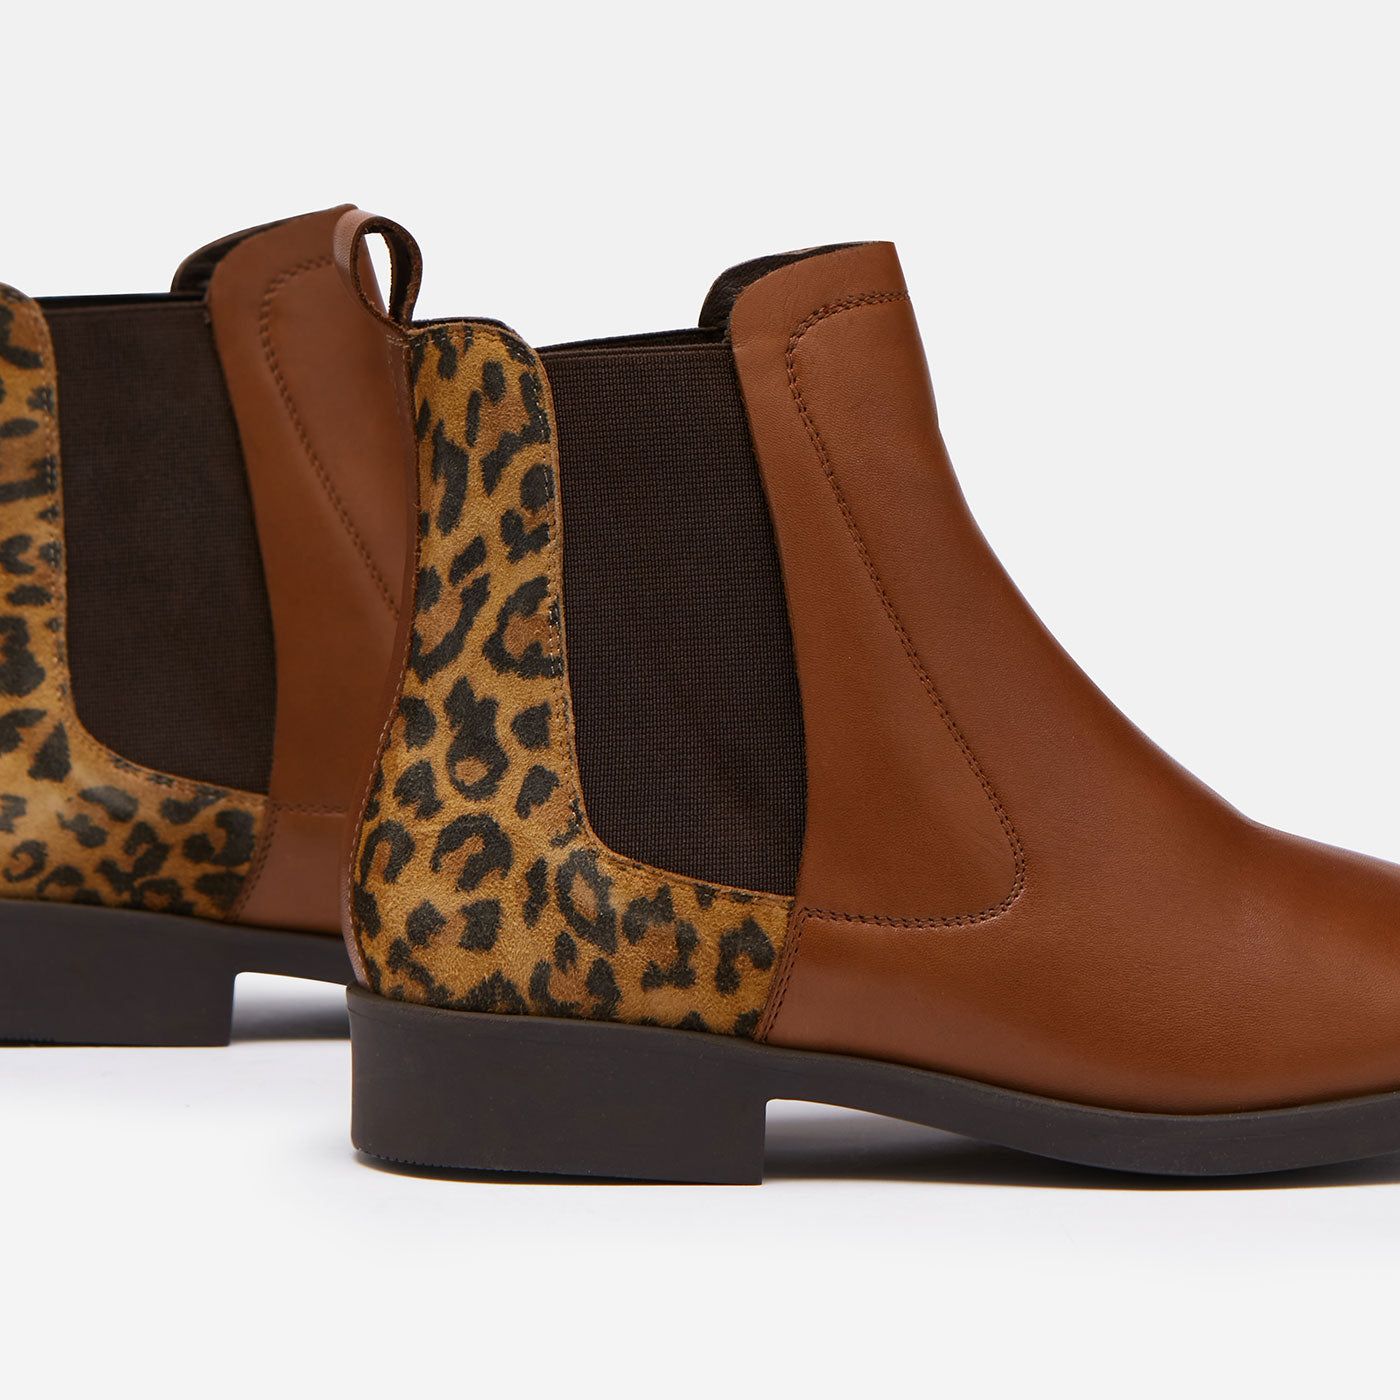 Joules Chelmsford Chelsea Boots